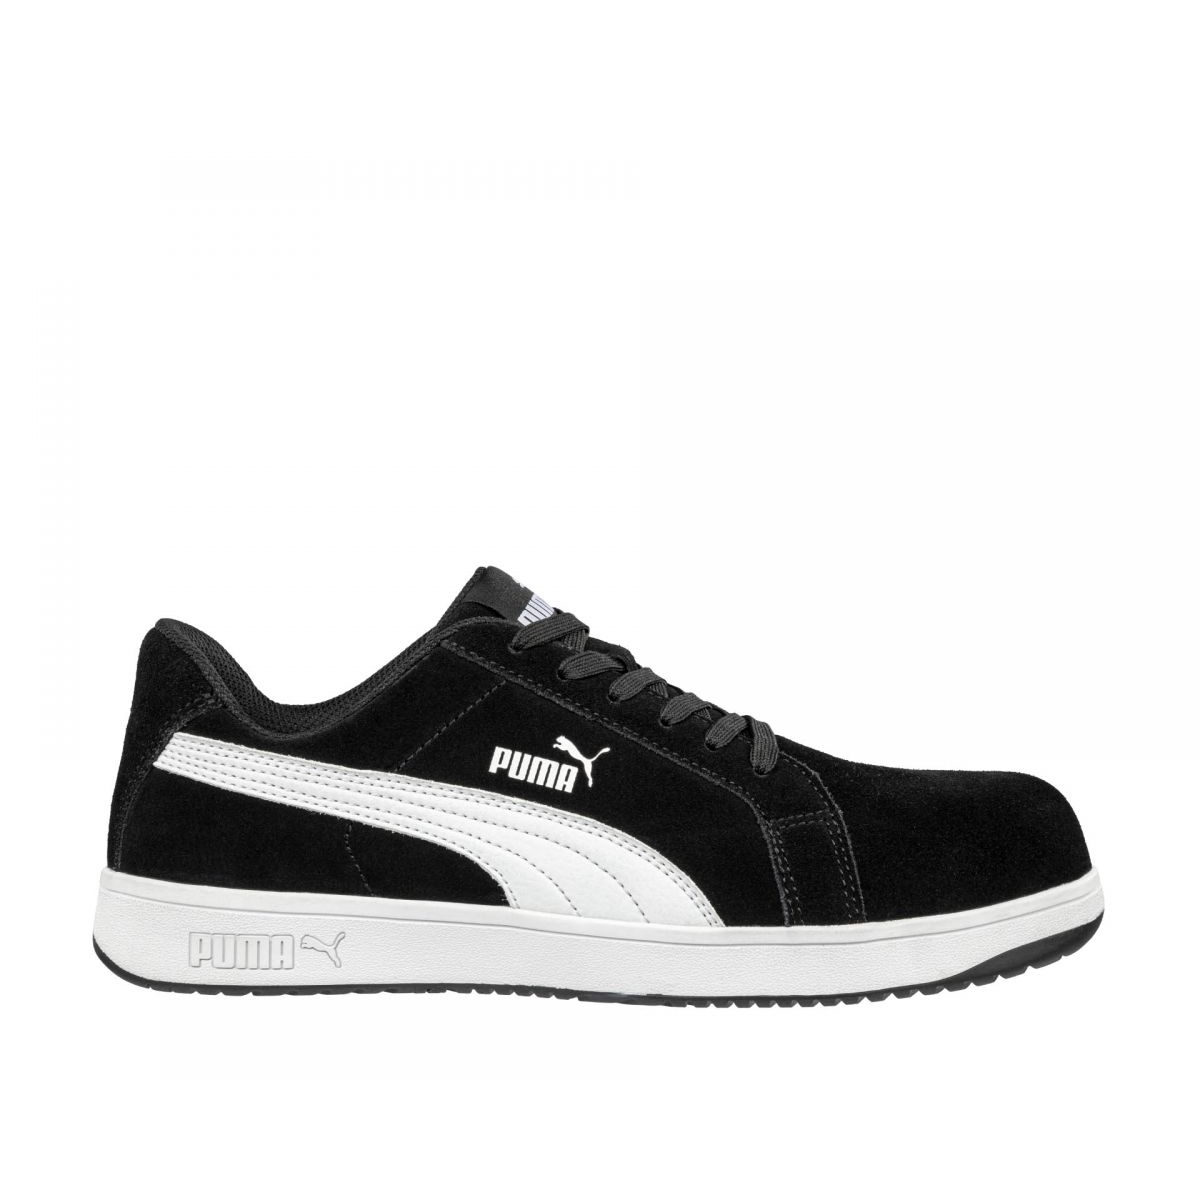 PUMA Safety Women's Iconic Low Composite Toe EH Work Shoes Black Suede - 640115 BLACK - BLACK, 7.5